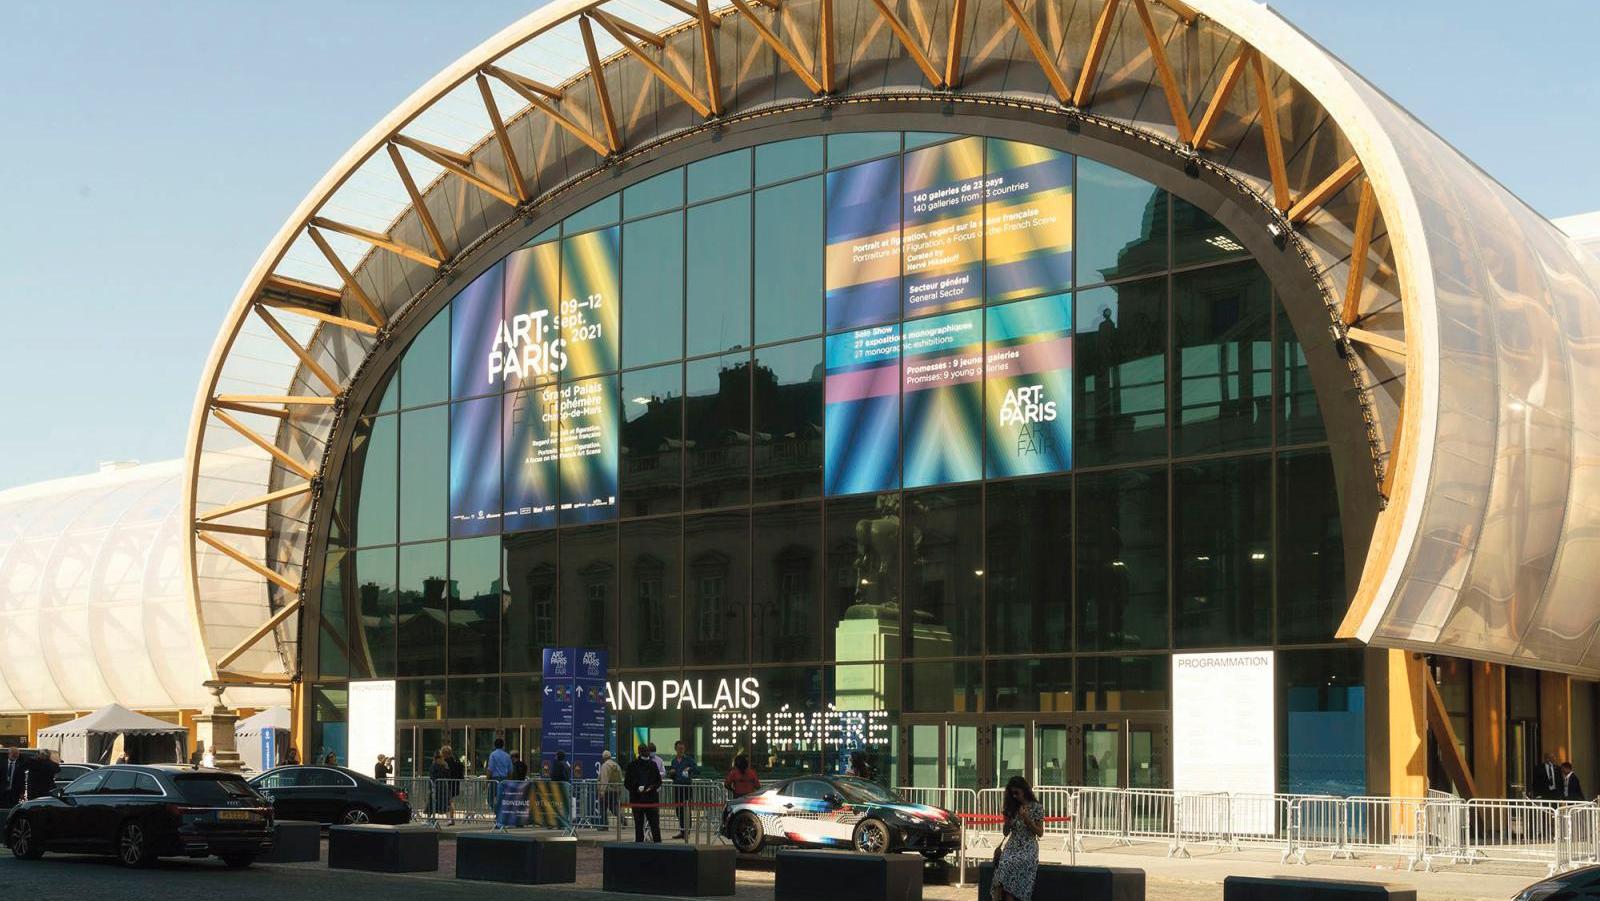 Art Paris, one of the few fairs to have been staged in 2021, is scheduled this year... Fairs: A Race for the Good Slots 